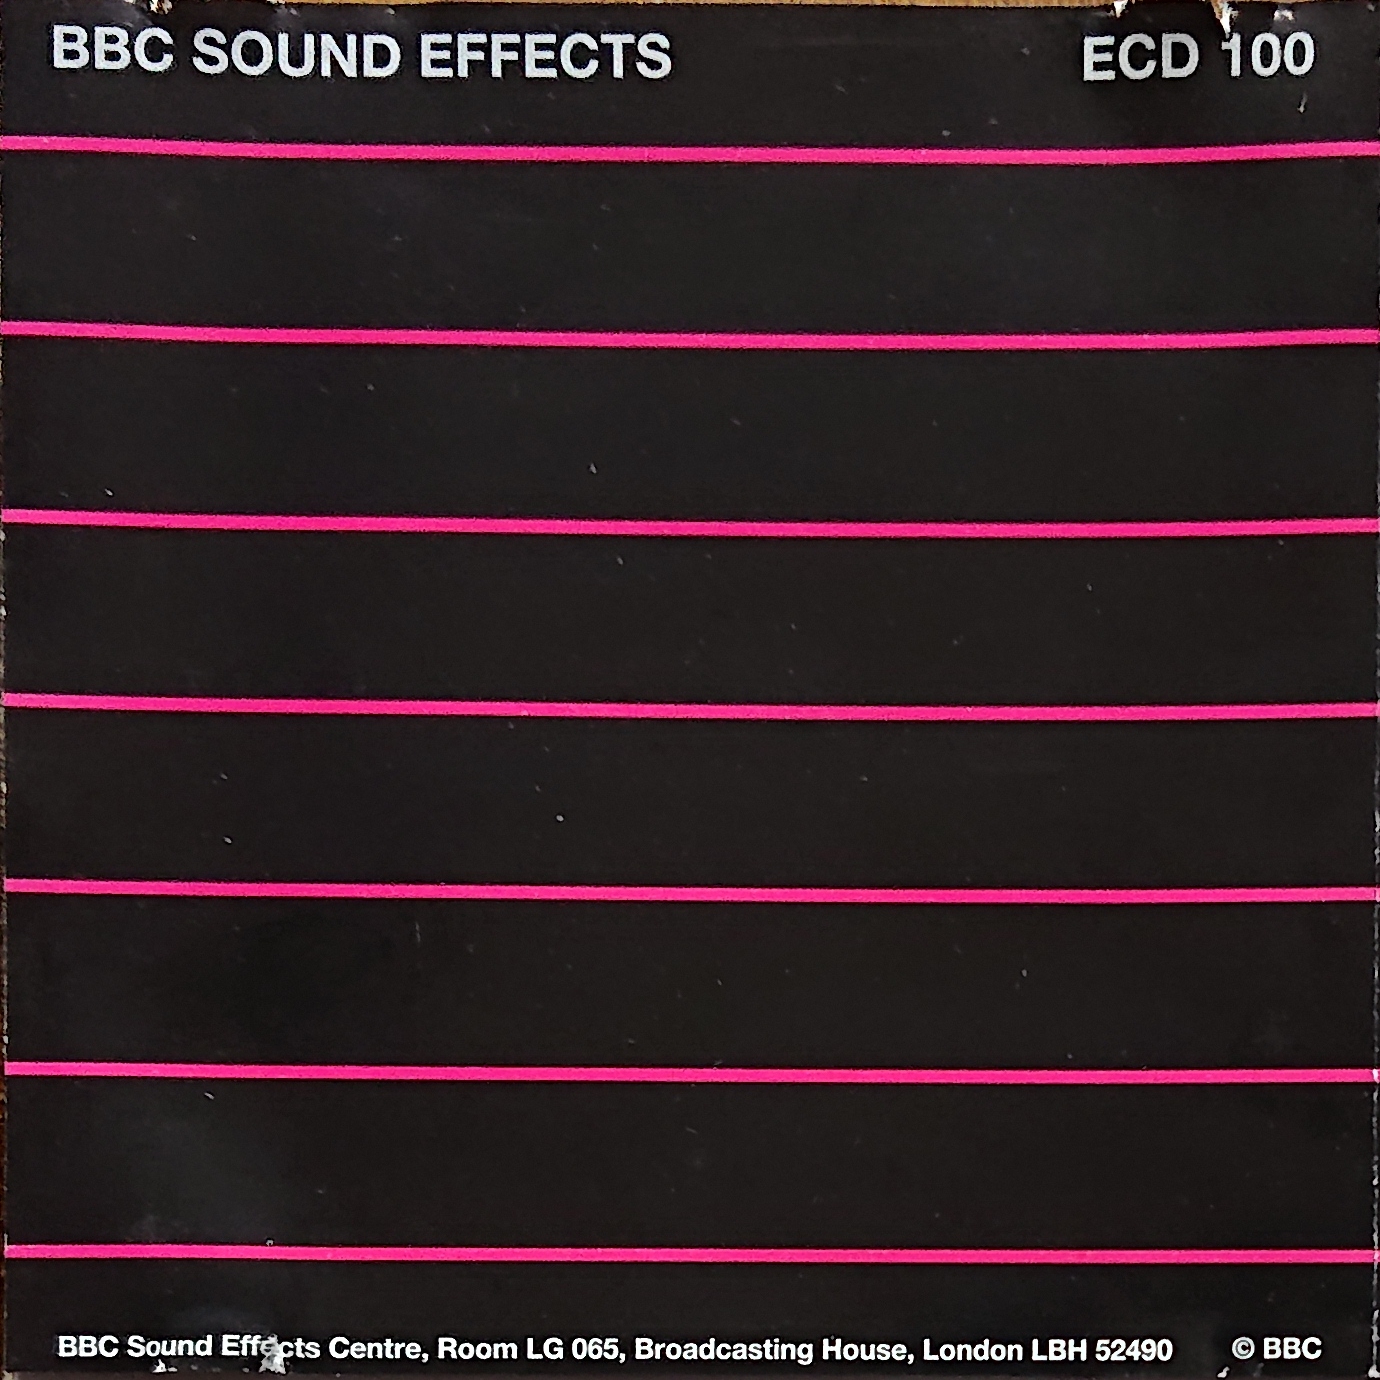 Middle of cover of ECD 100